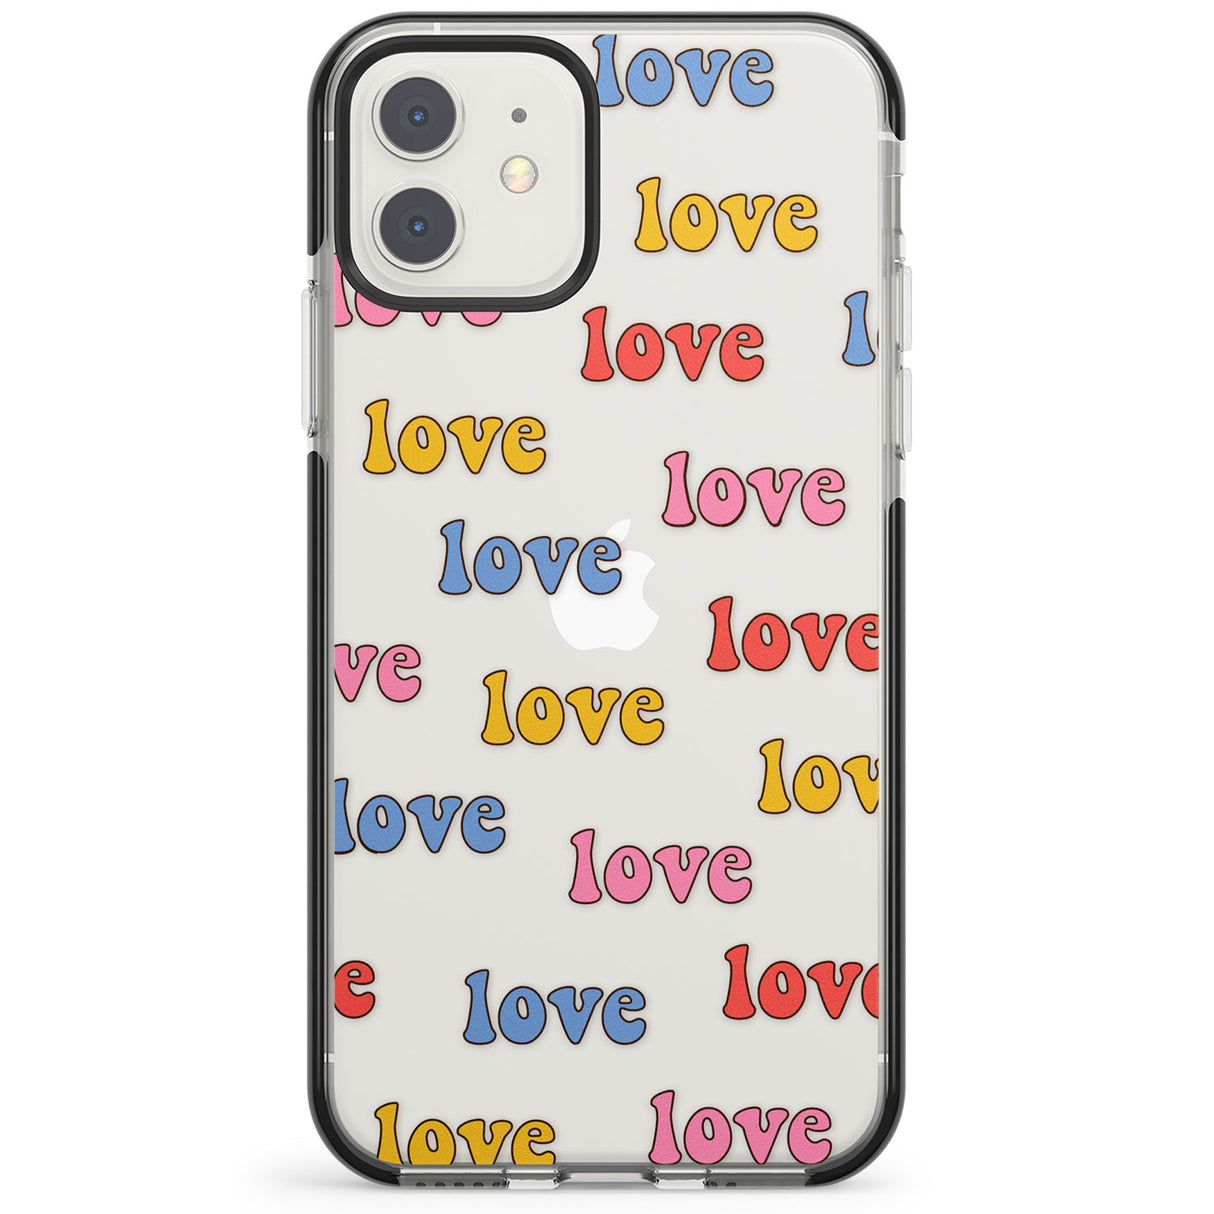 Love Pattern Impact Phone Case for iPhone 11, iphone 12